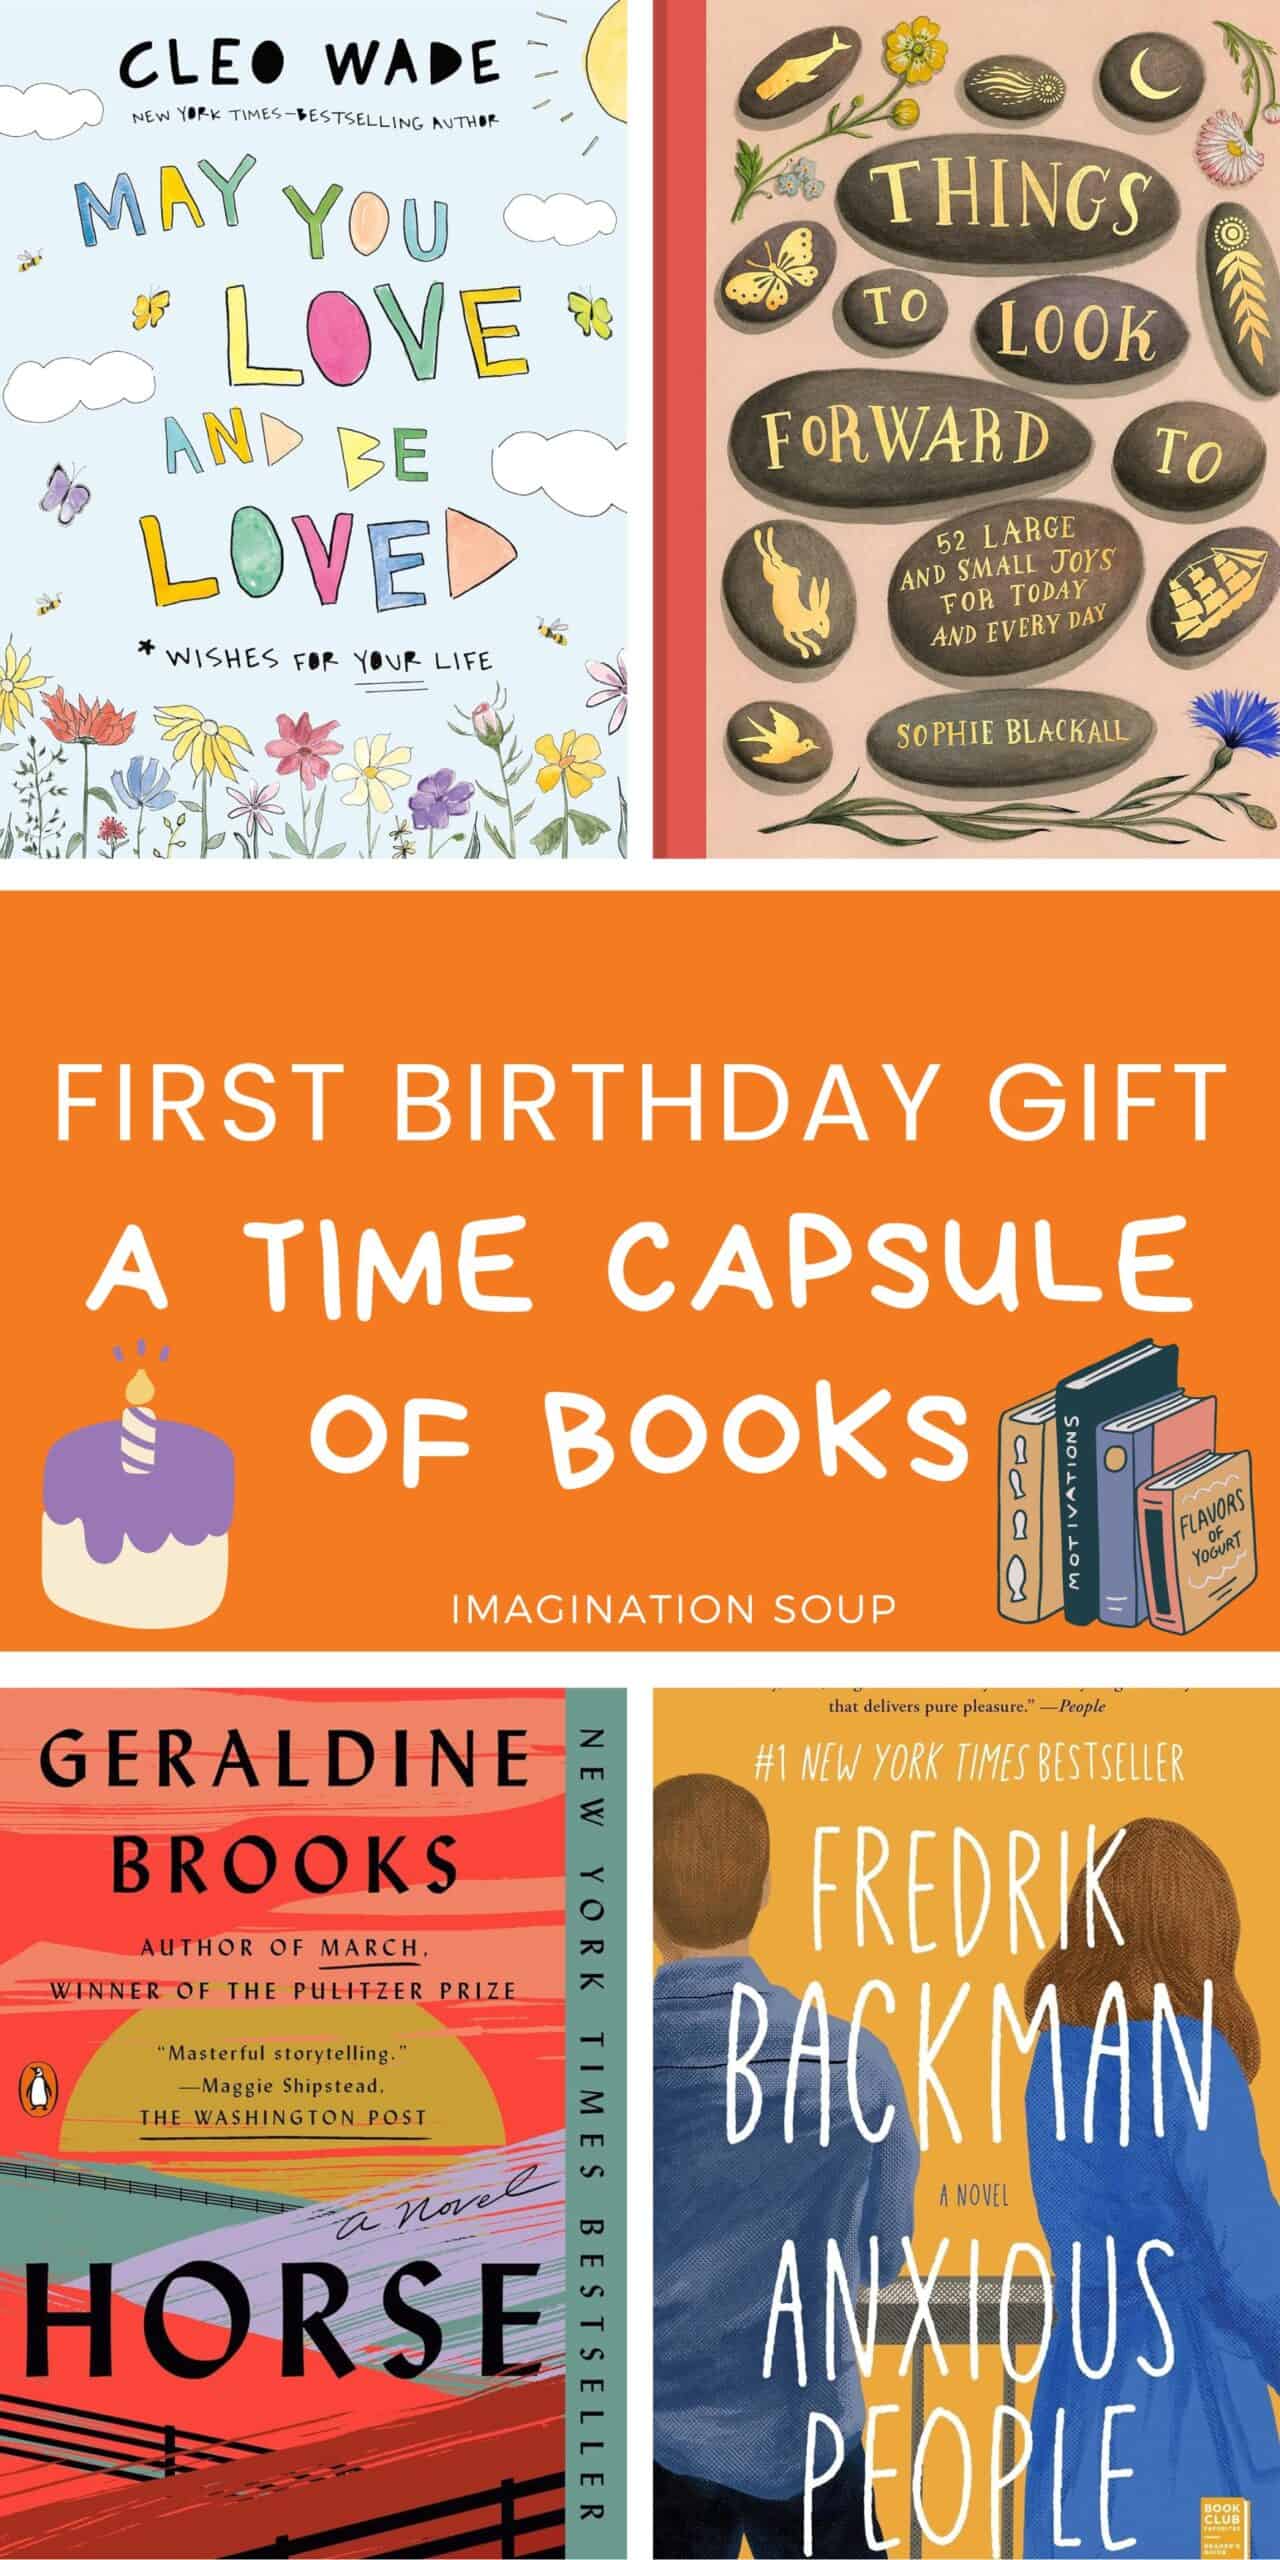 First Birthday Gift: A Time Capsule of Books